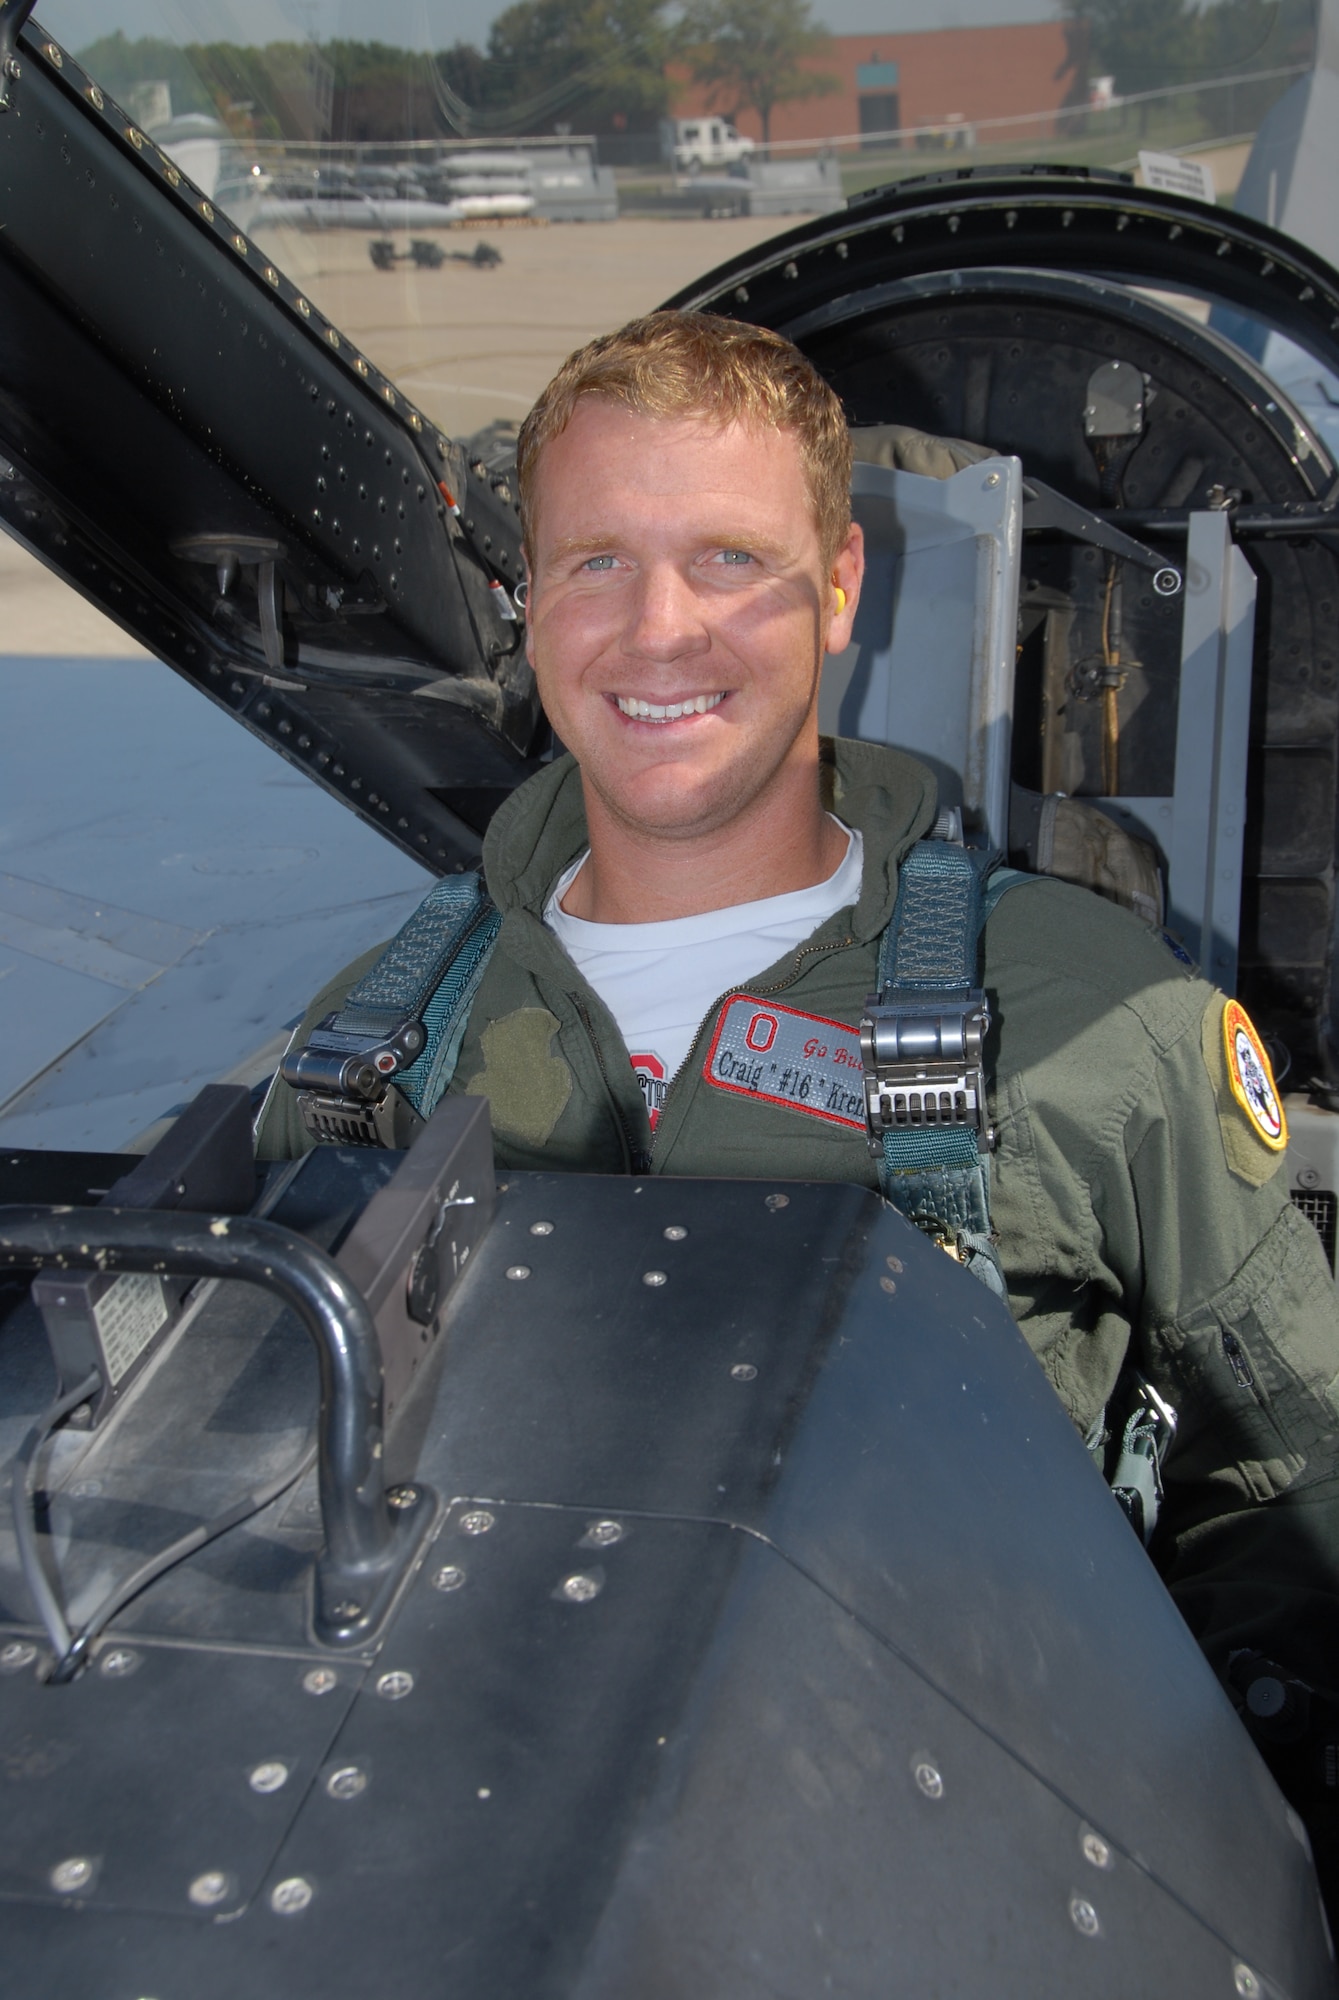 Former Ohio State University quarterback Craig Krenzel poses before his F-16 familiarization flight Sep. 11, 2009 at the 178th Fighter Wing, Springfield, Ohio